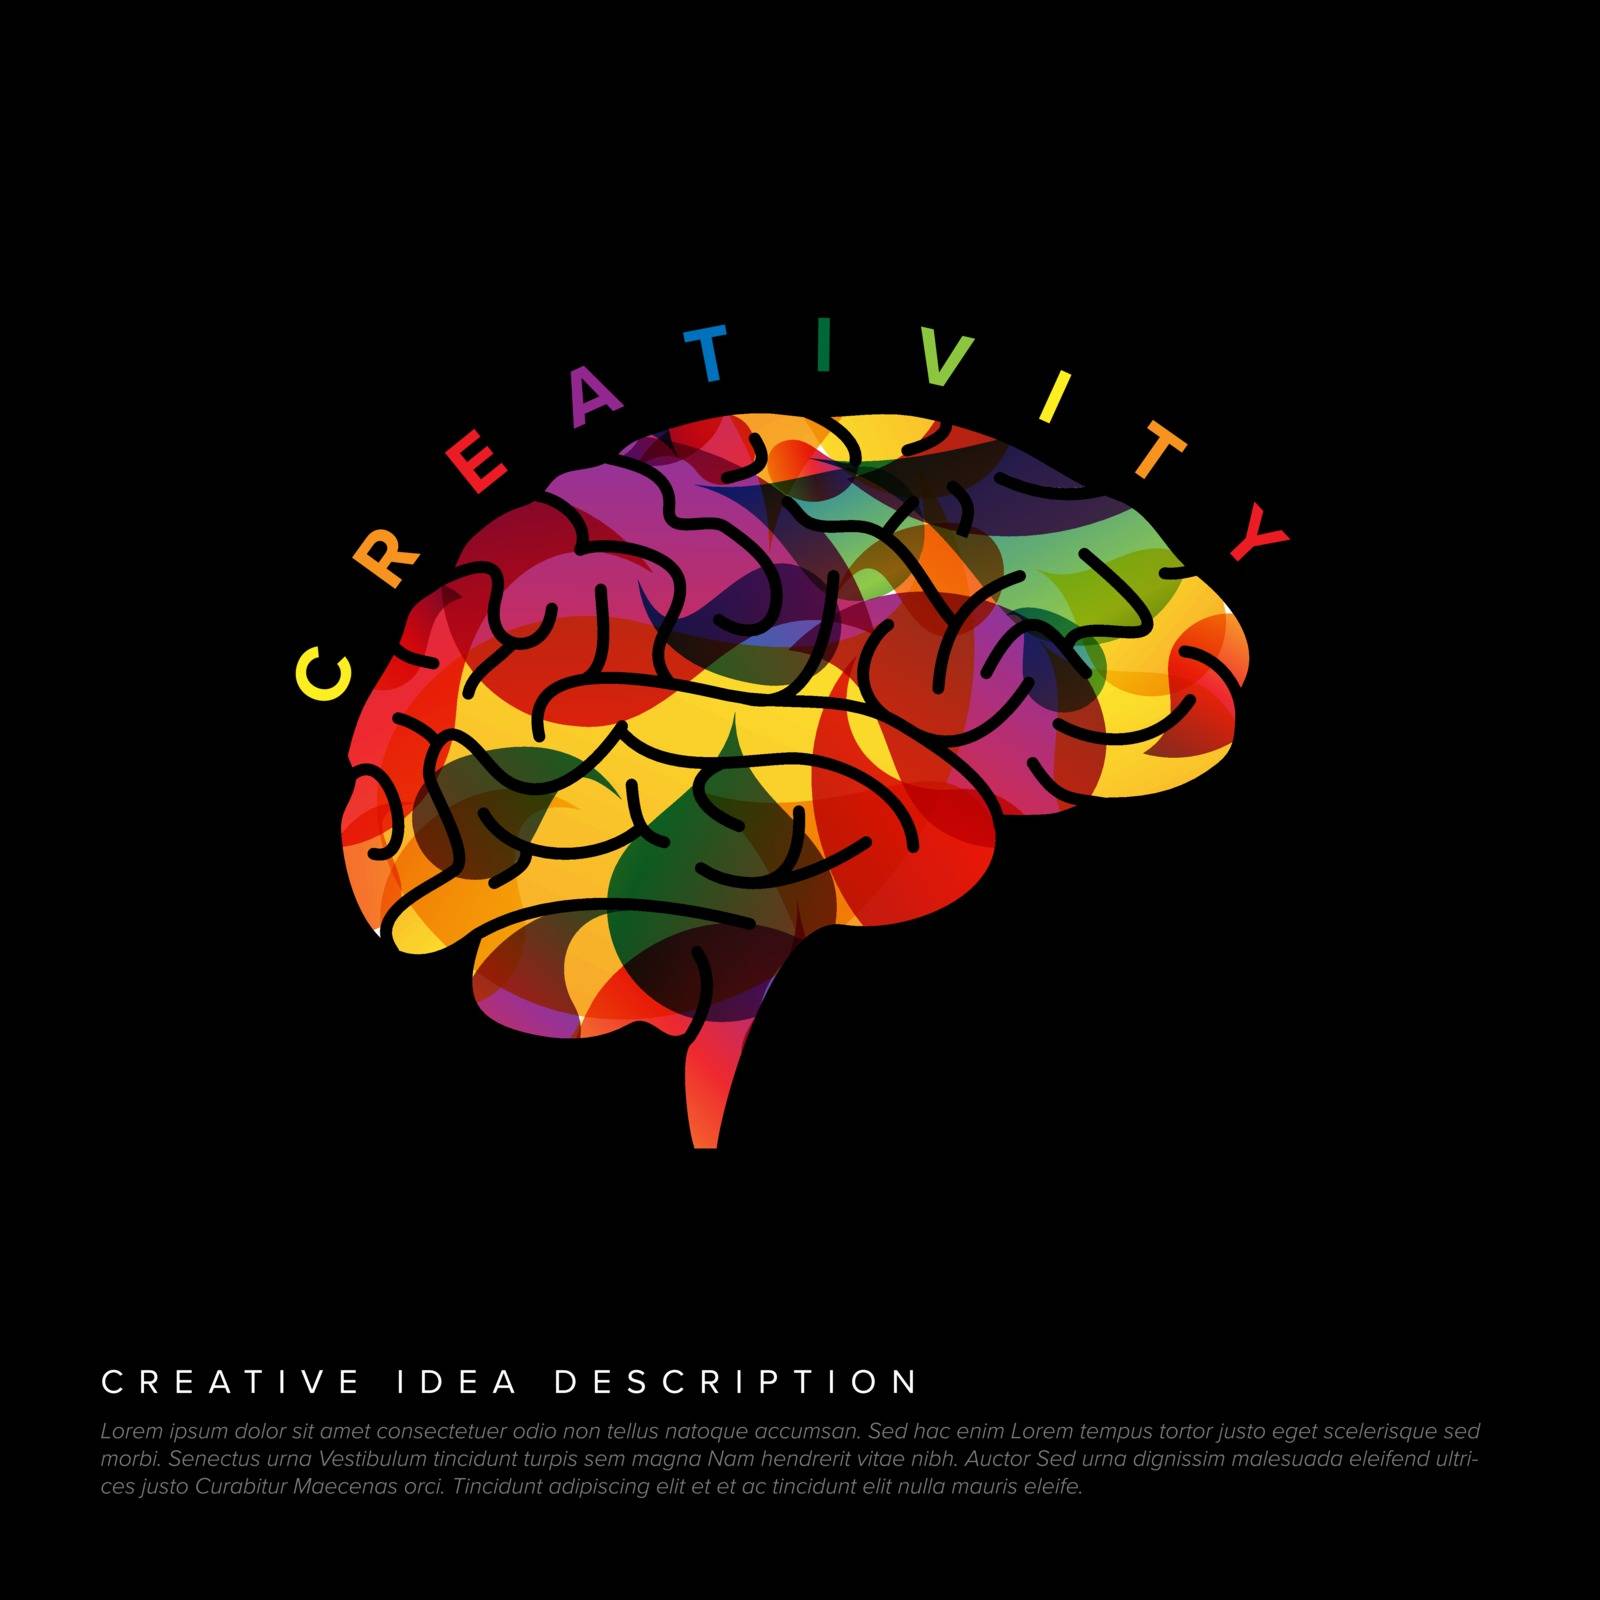 Creative idea concept illustration template made from colorful droplets and a brain icon - dark version